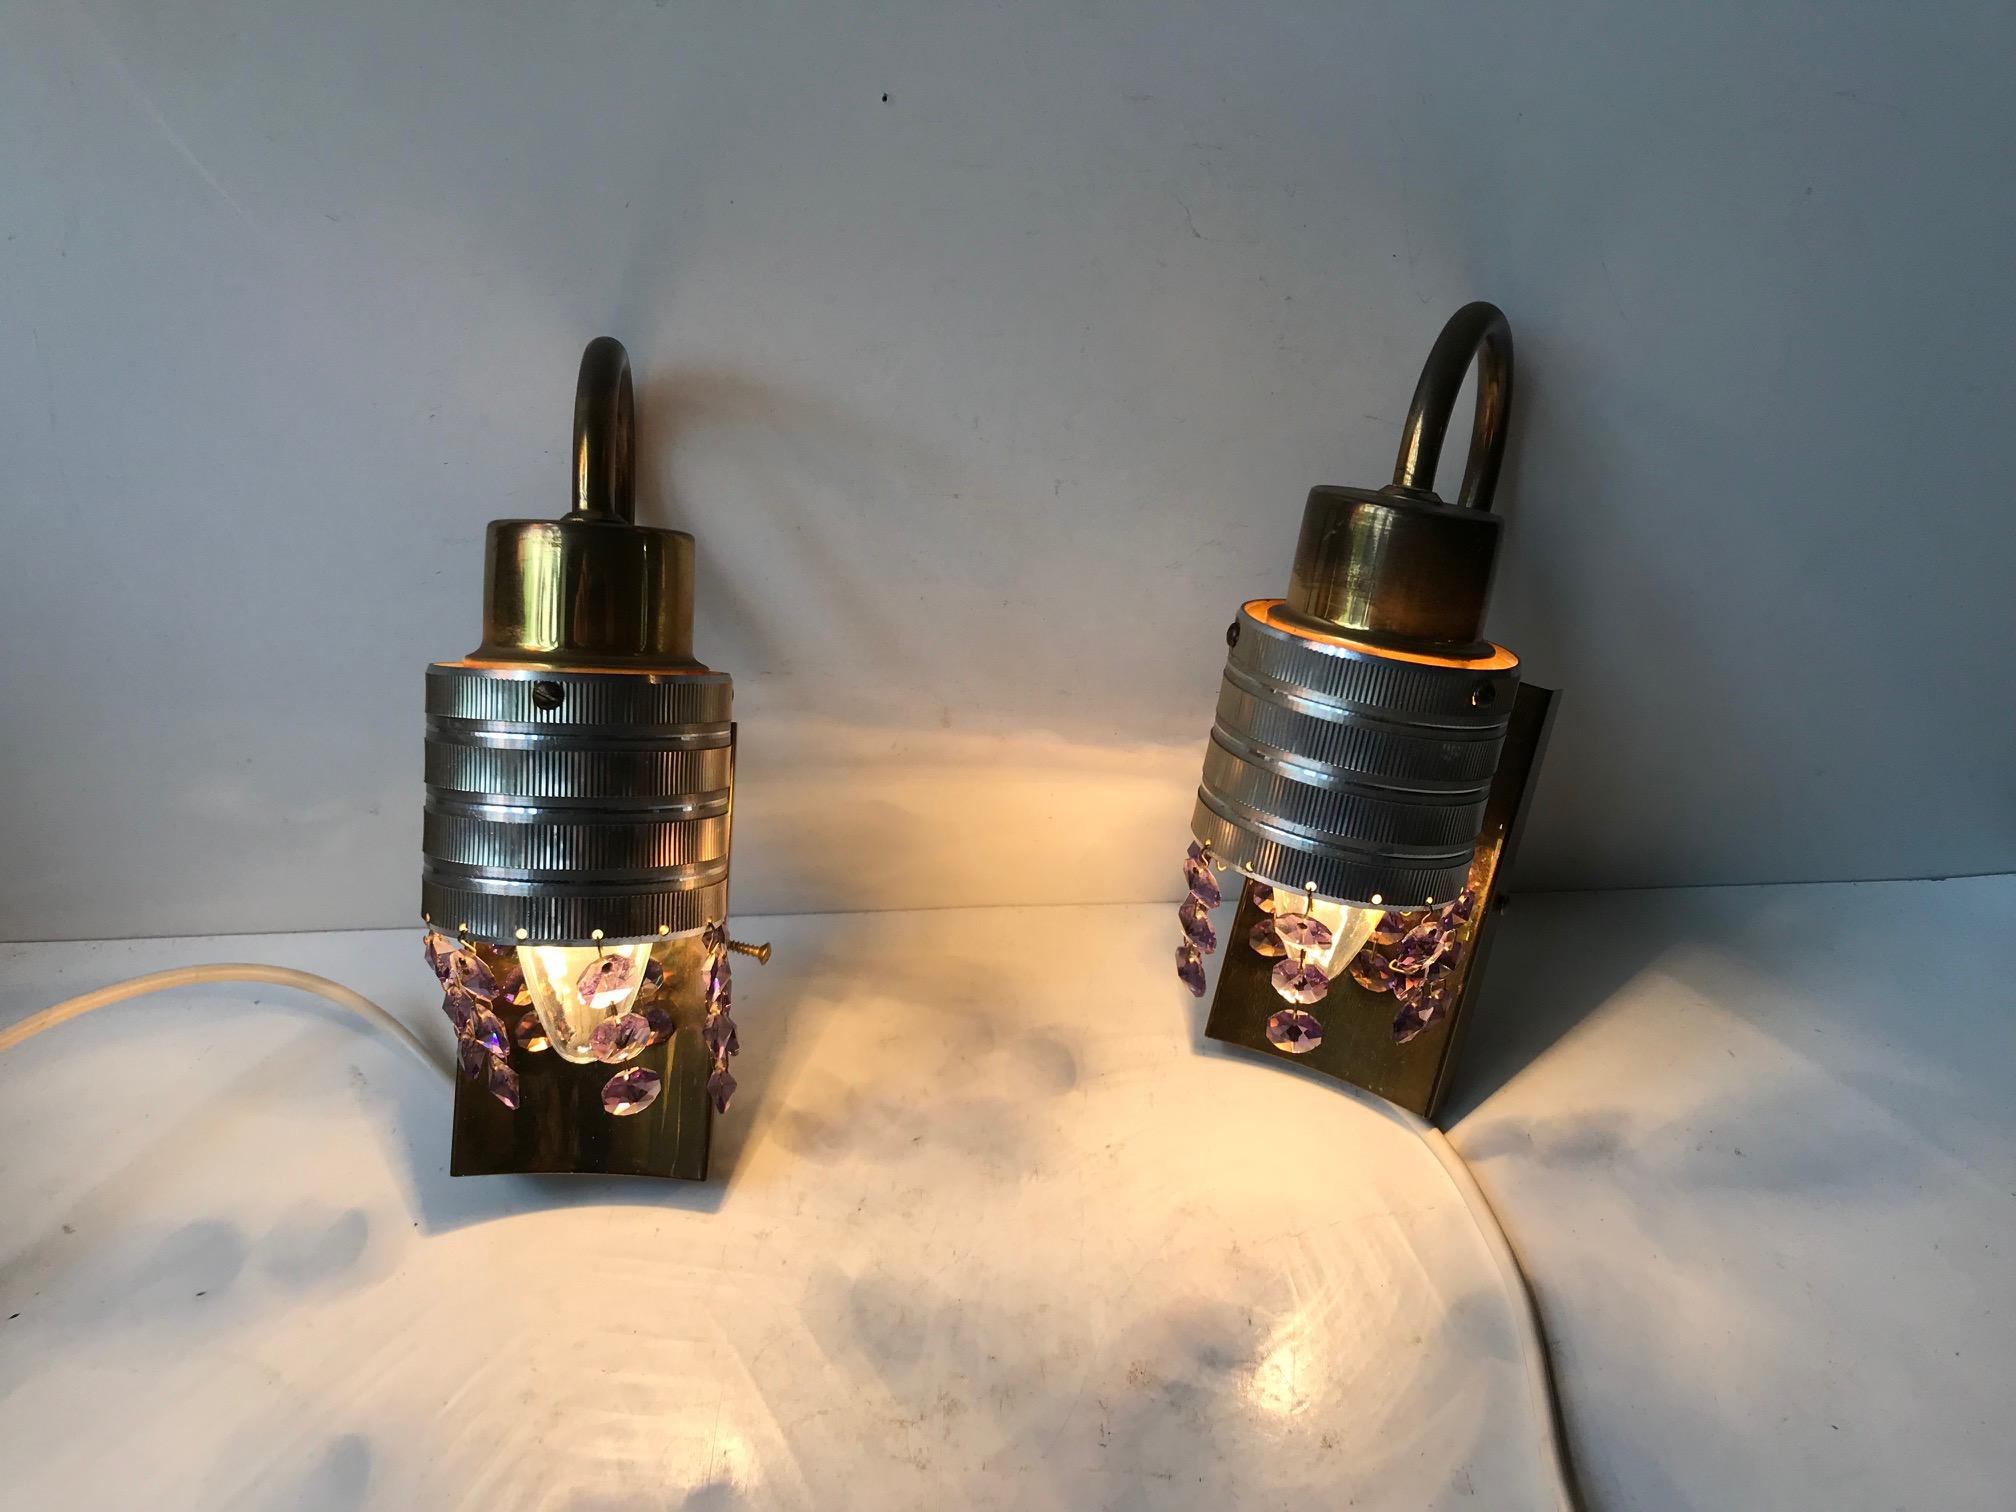 Aluminum Pair of Scandinavian Modern Prism Wall Lights in Brass and Crystal, 1960s